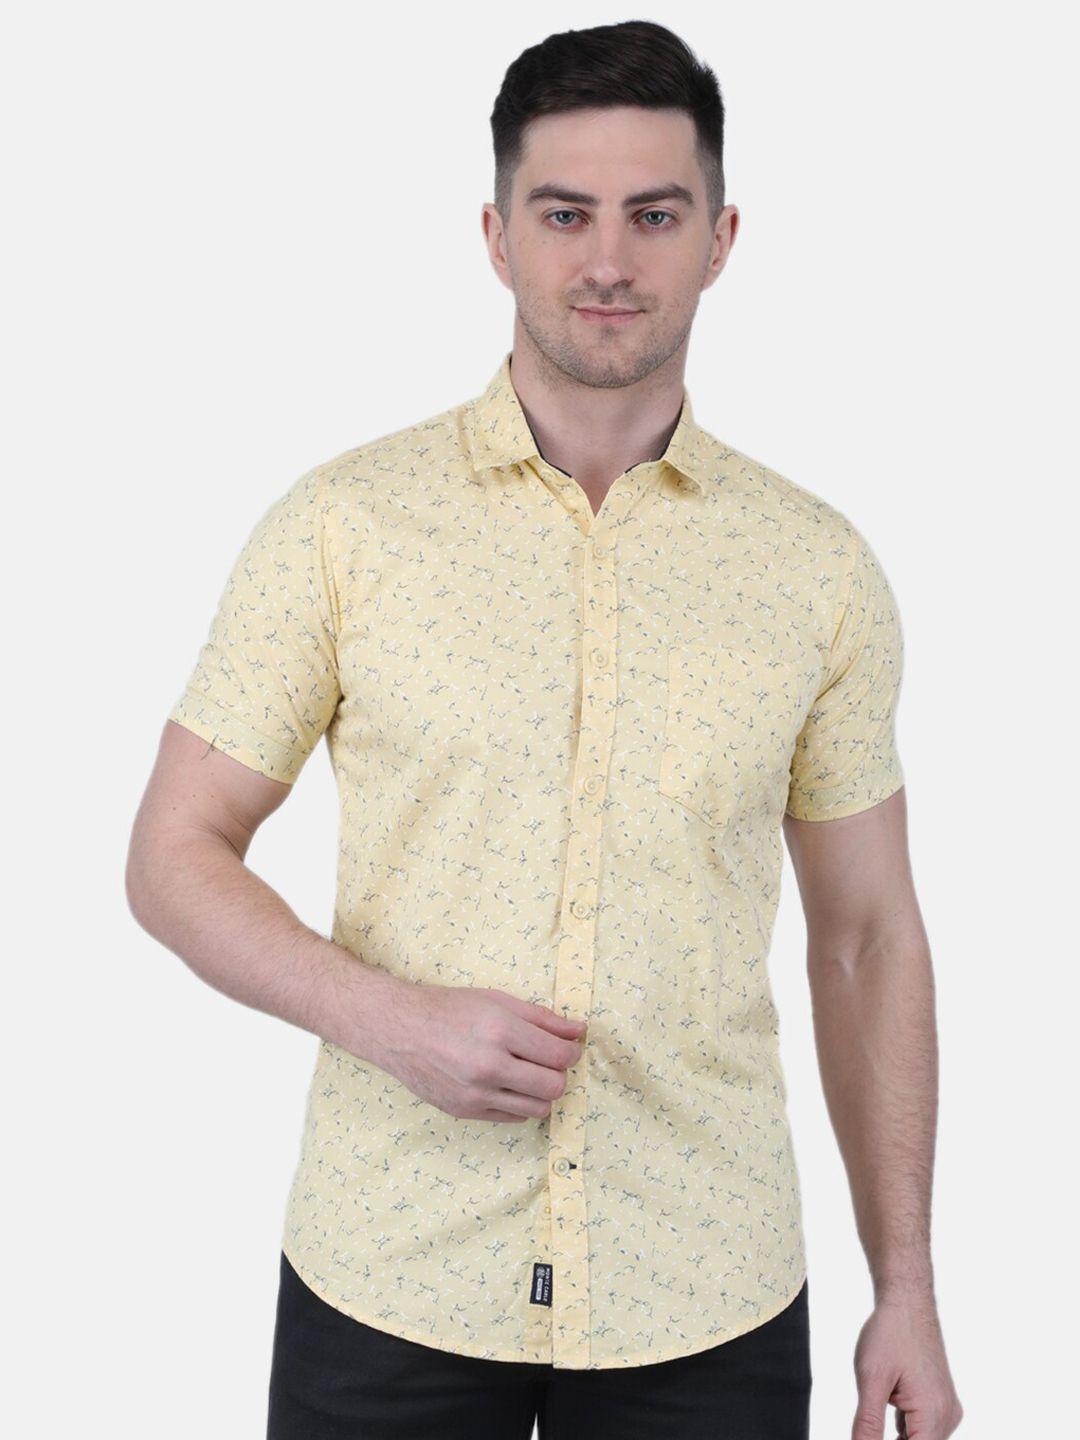 monte carlo straight floral printed casual shirt